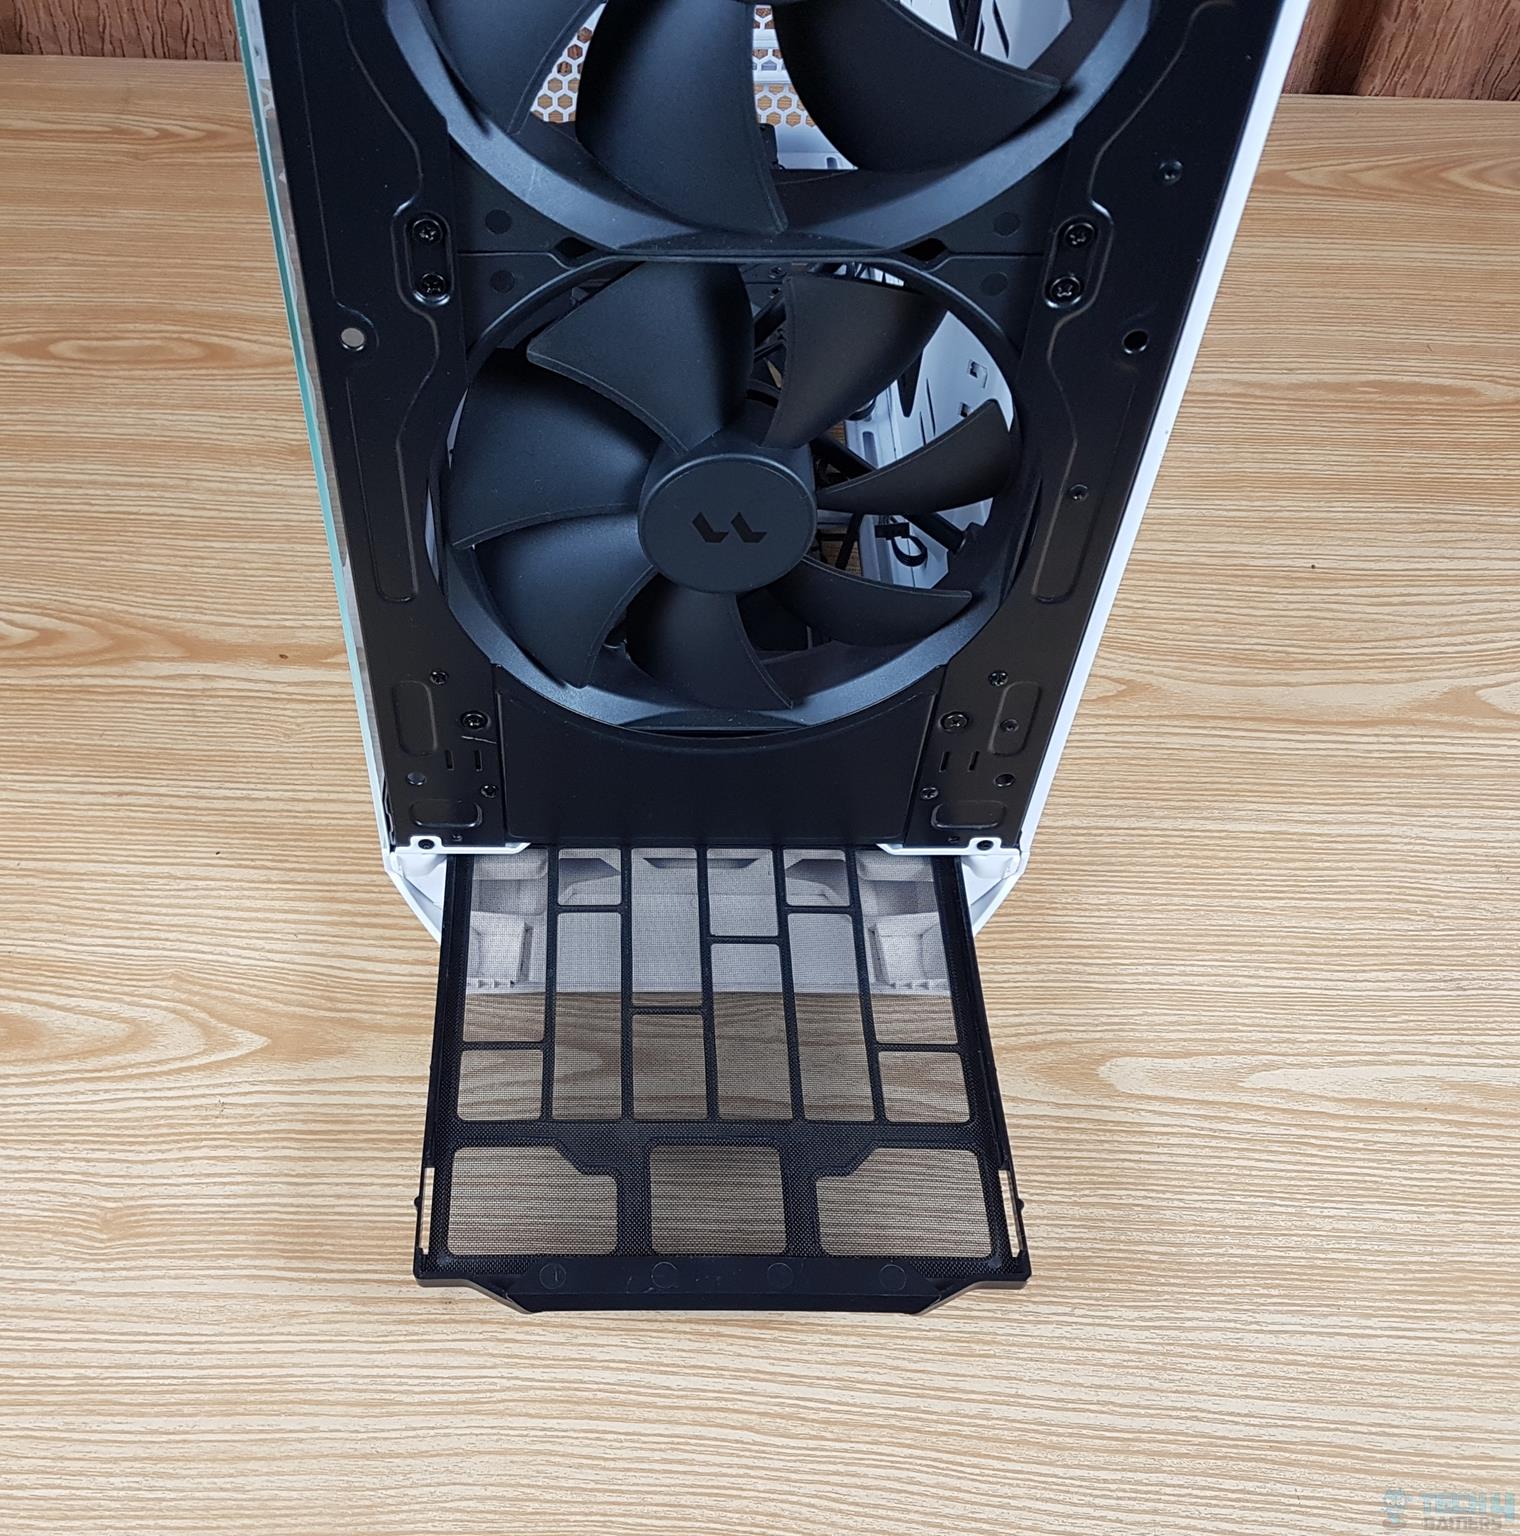 Fractal Design Torrent White TG Clear Tint PC Case — Taking out the bottom dust filter